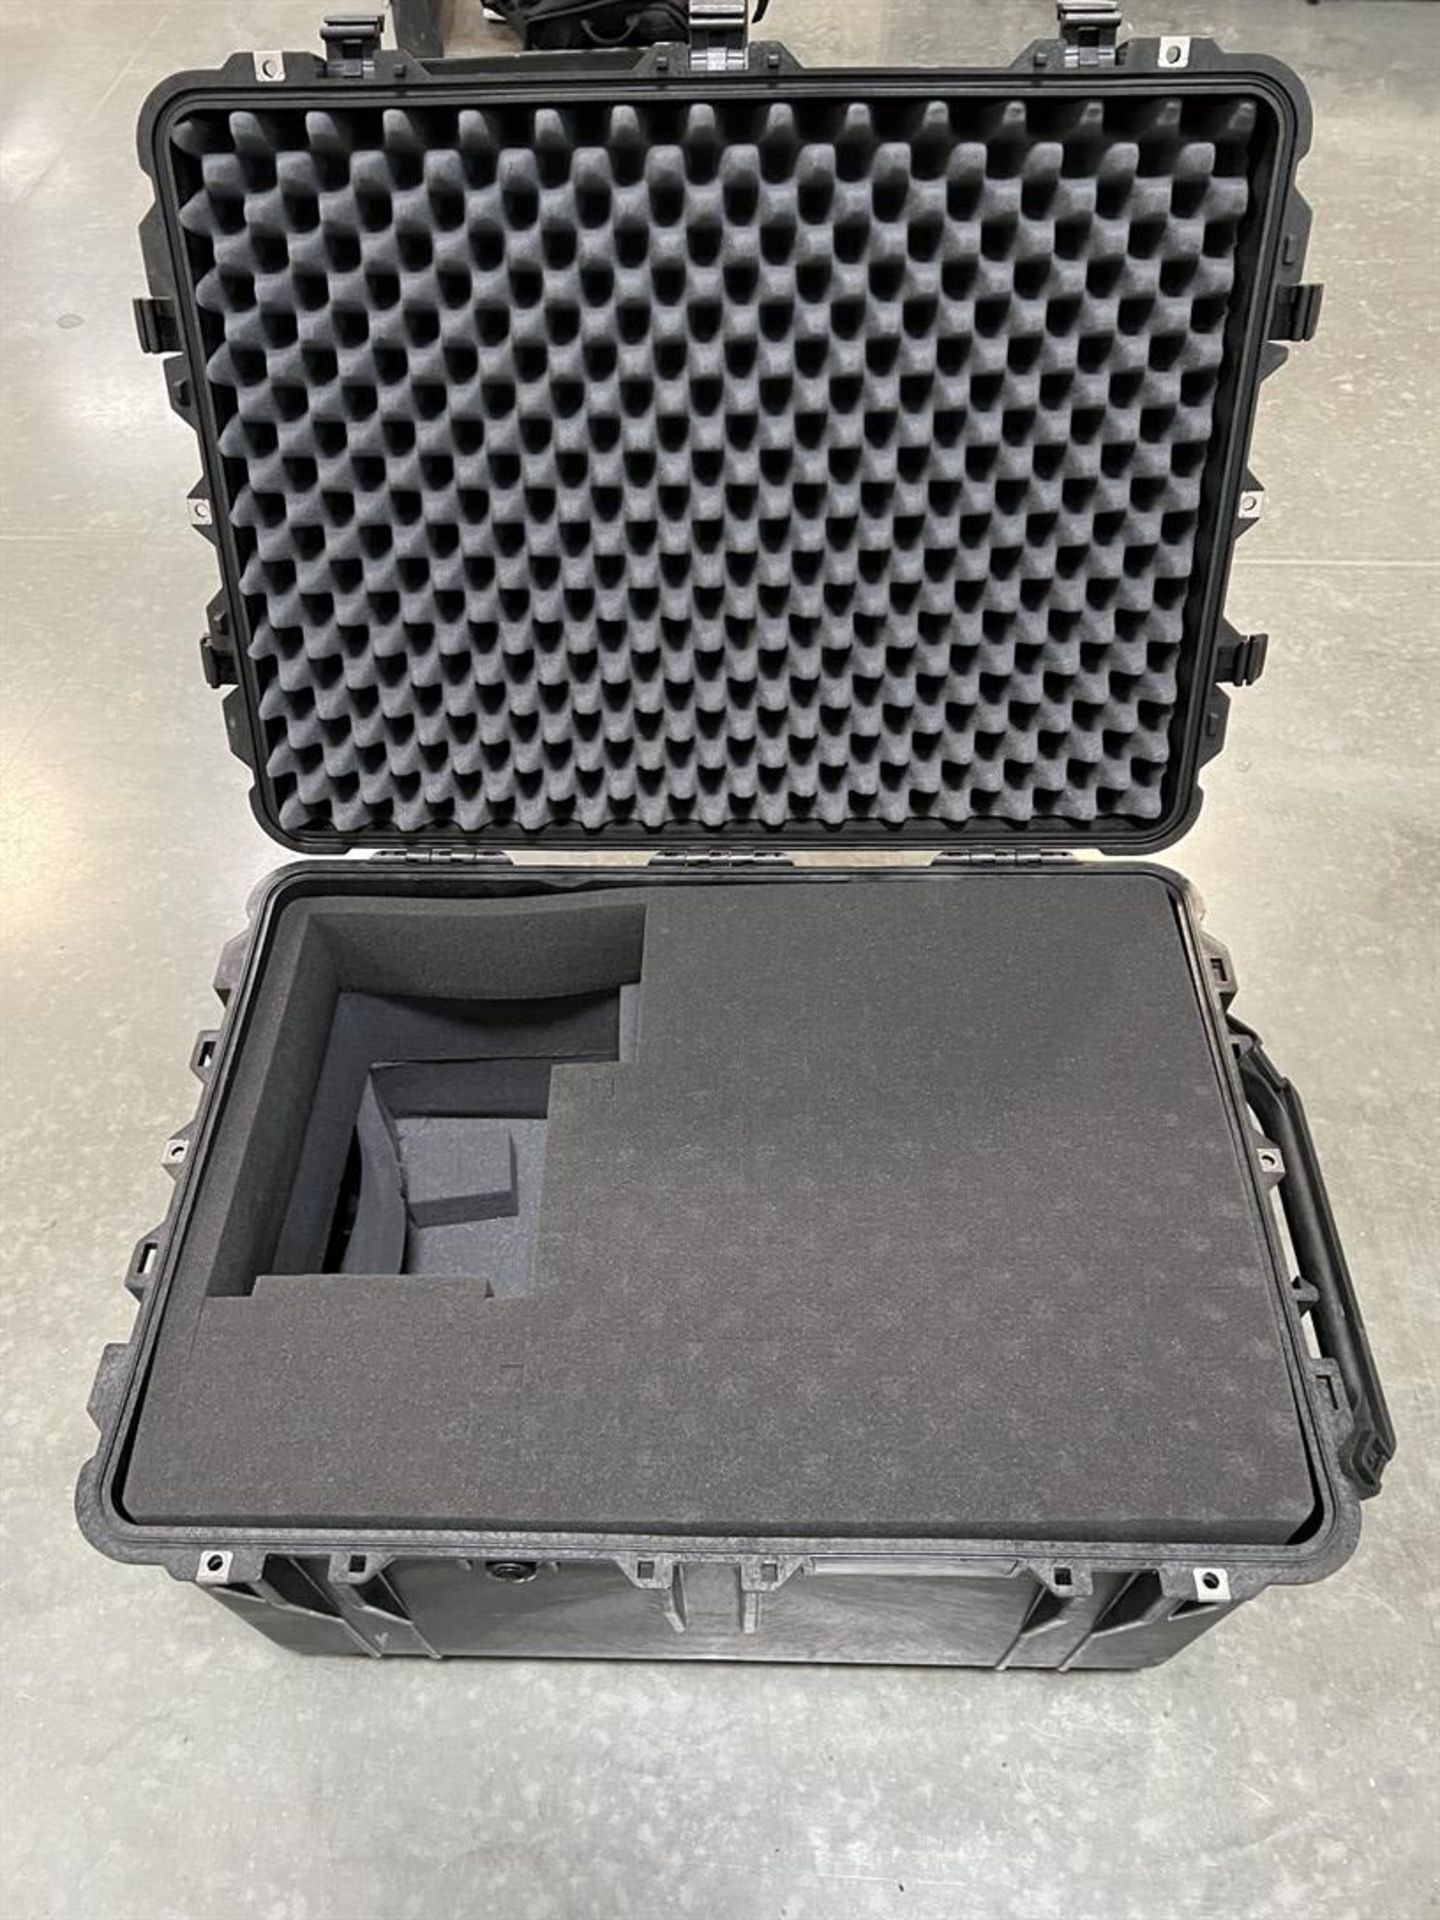 PELICAN 1660 Protective Transport Case - Image 3 of 3